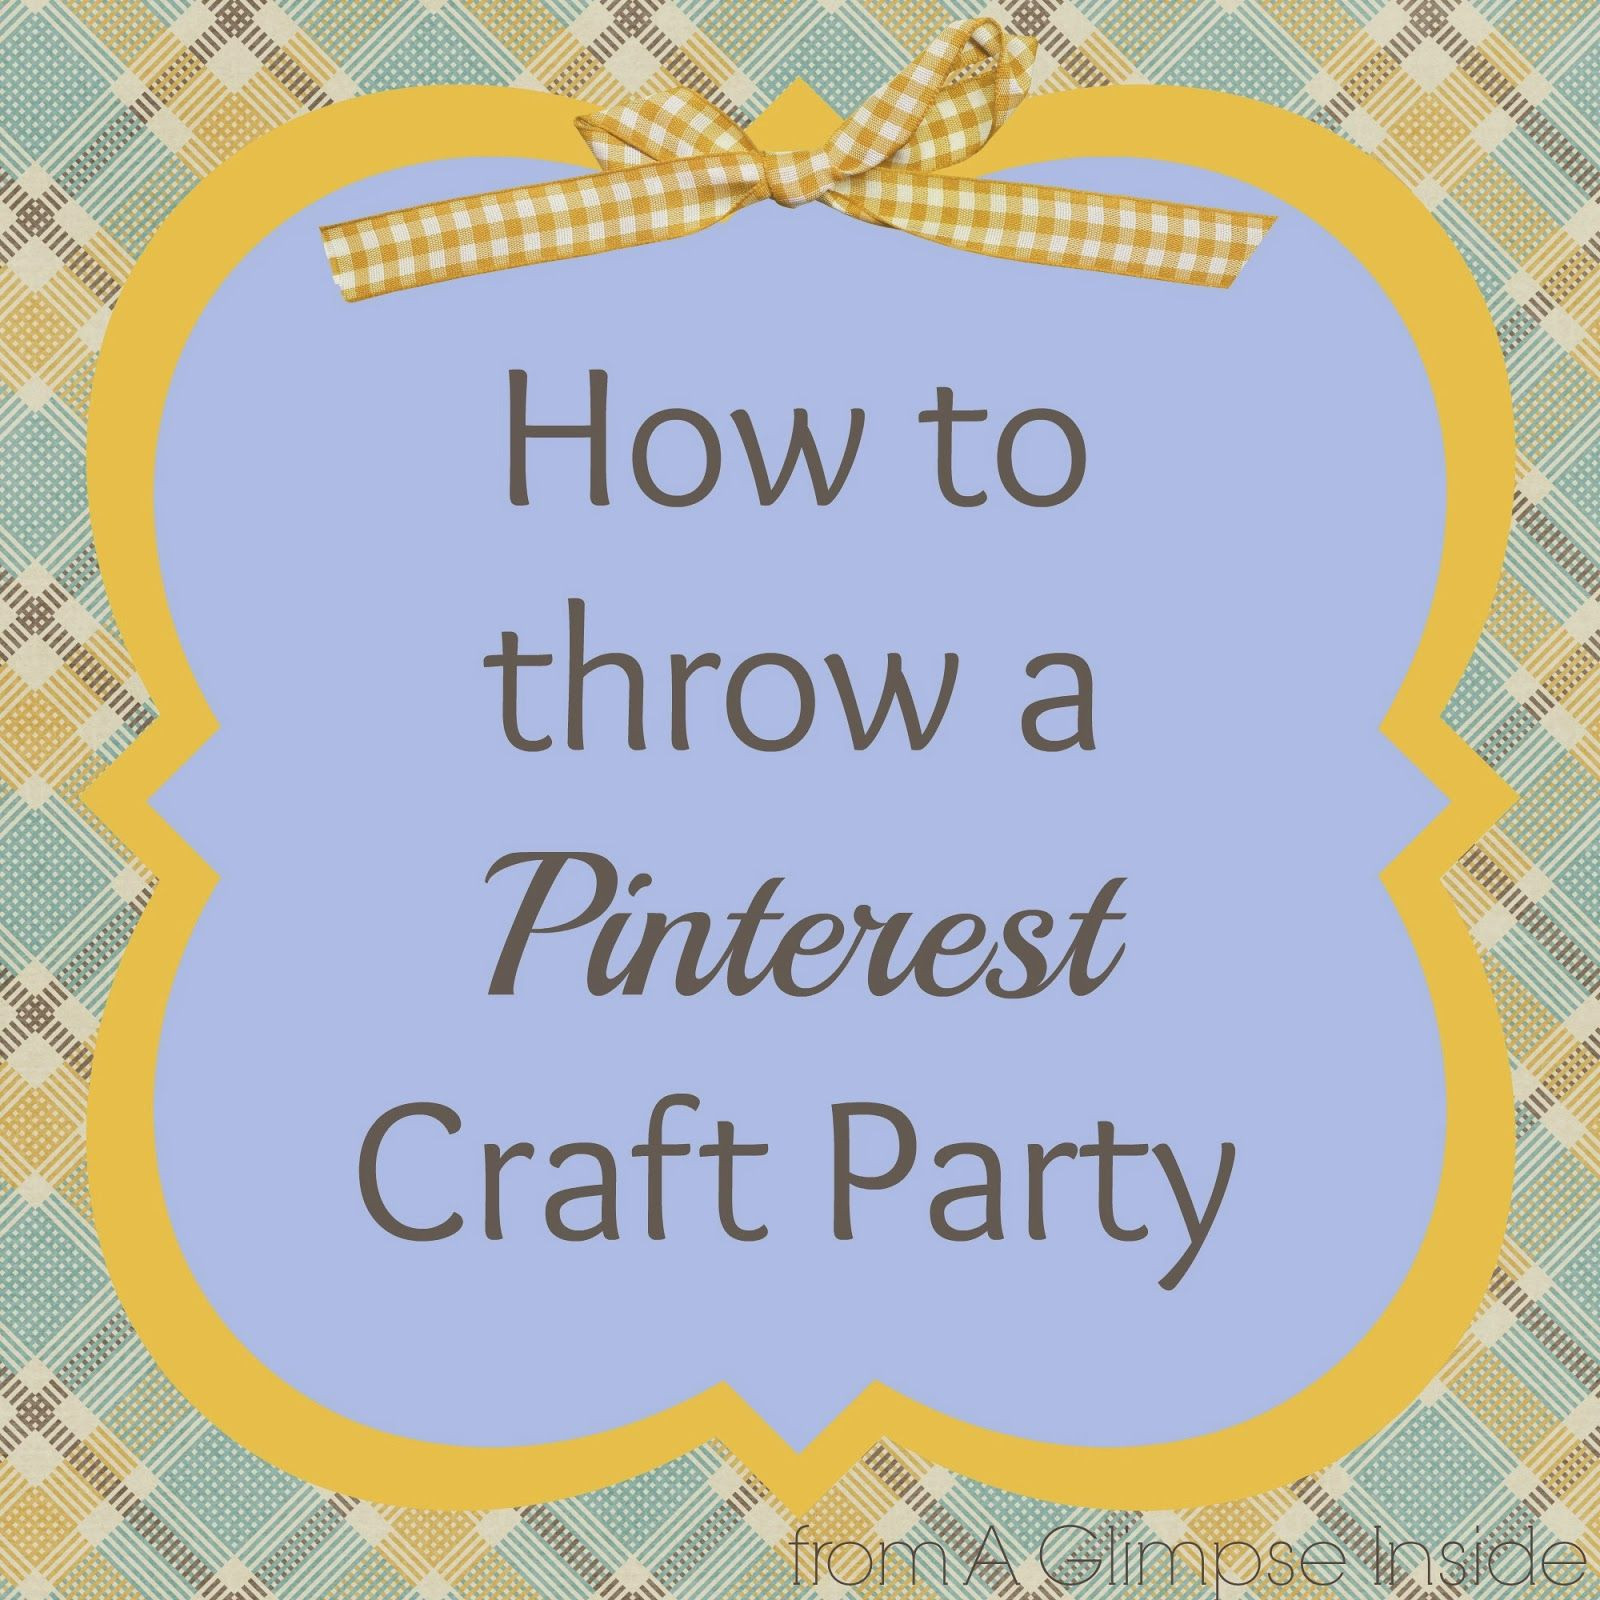 Craft Club Ideas For Adults
 The top 20 Ideas About Craft Clubs for Adults Best DIY